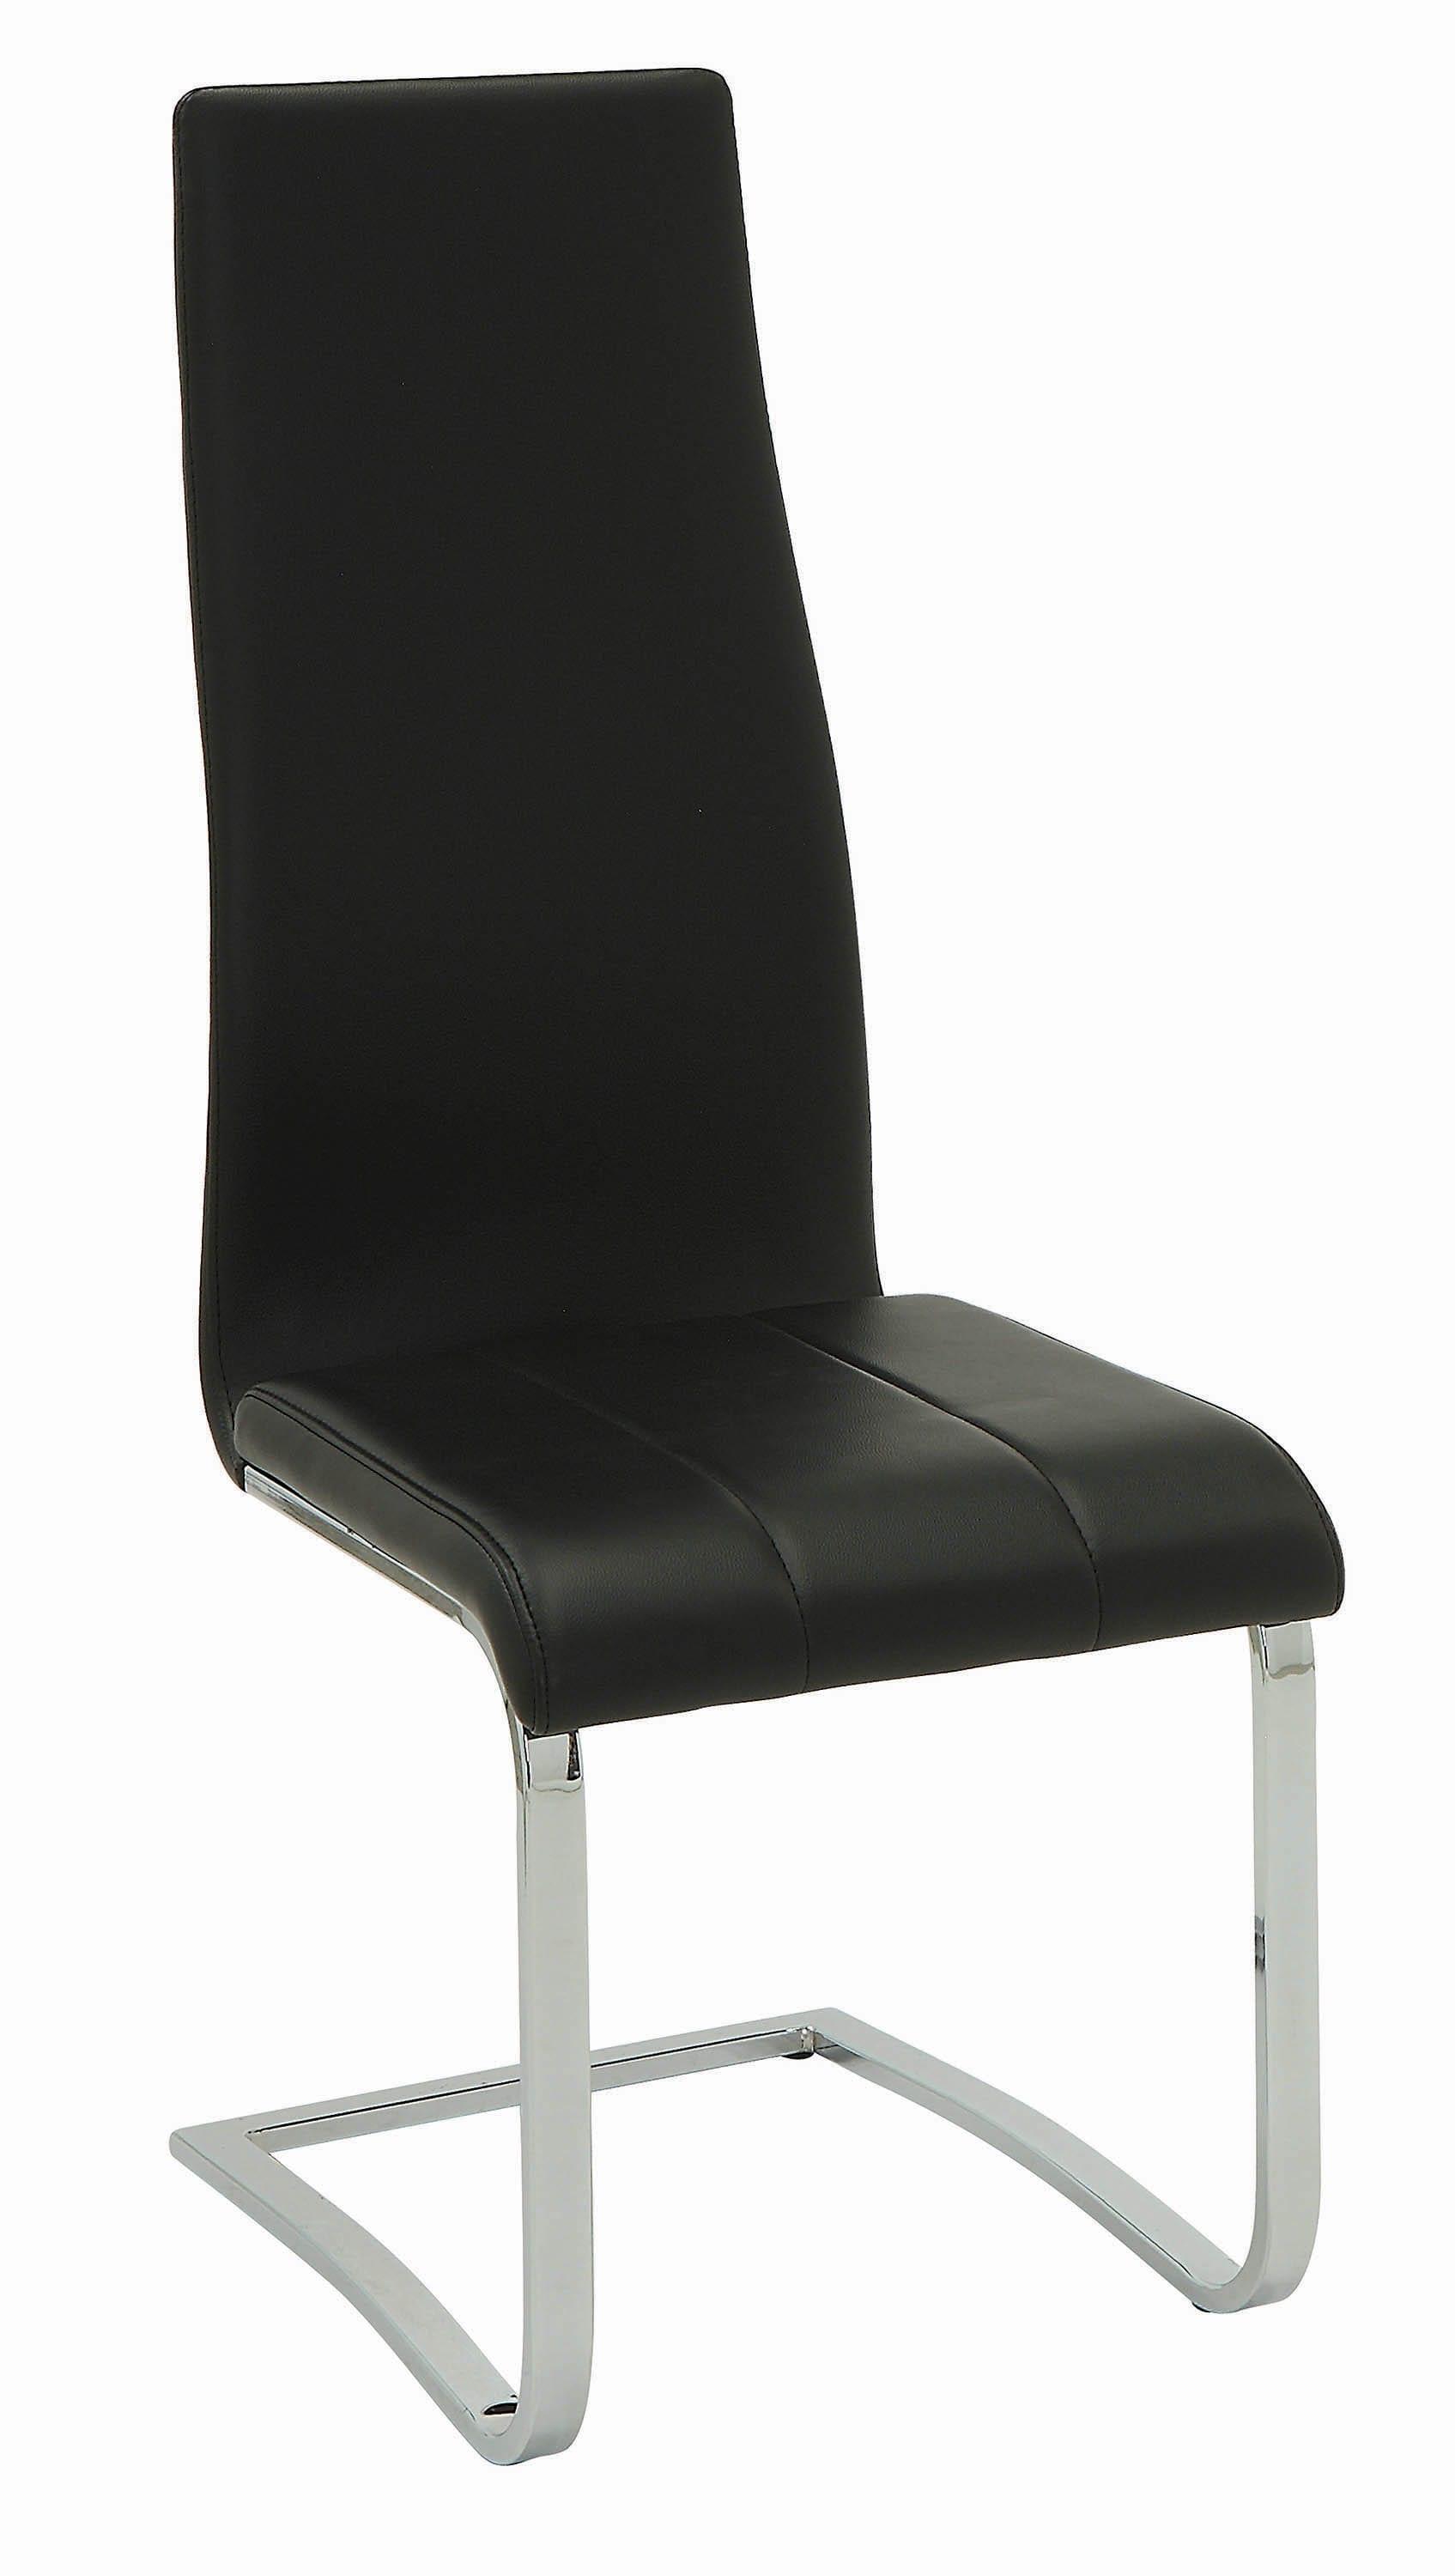 Contemporary Dining Chair Stanton 100515BLK in Black Faux Leather